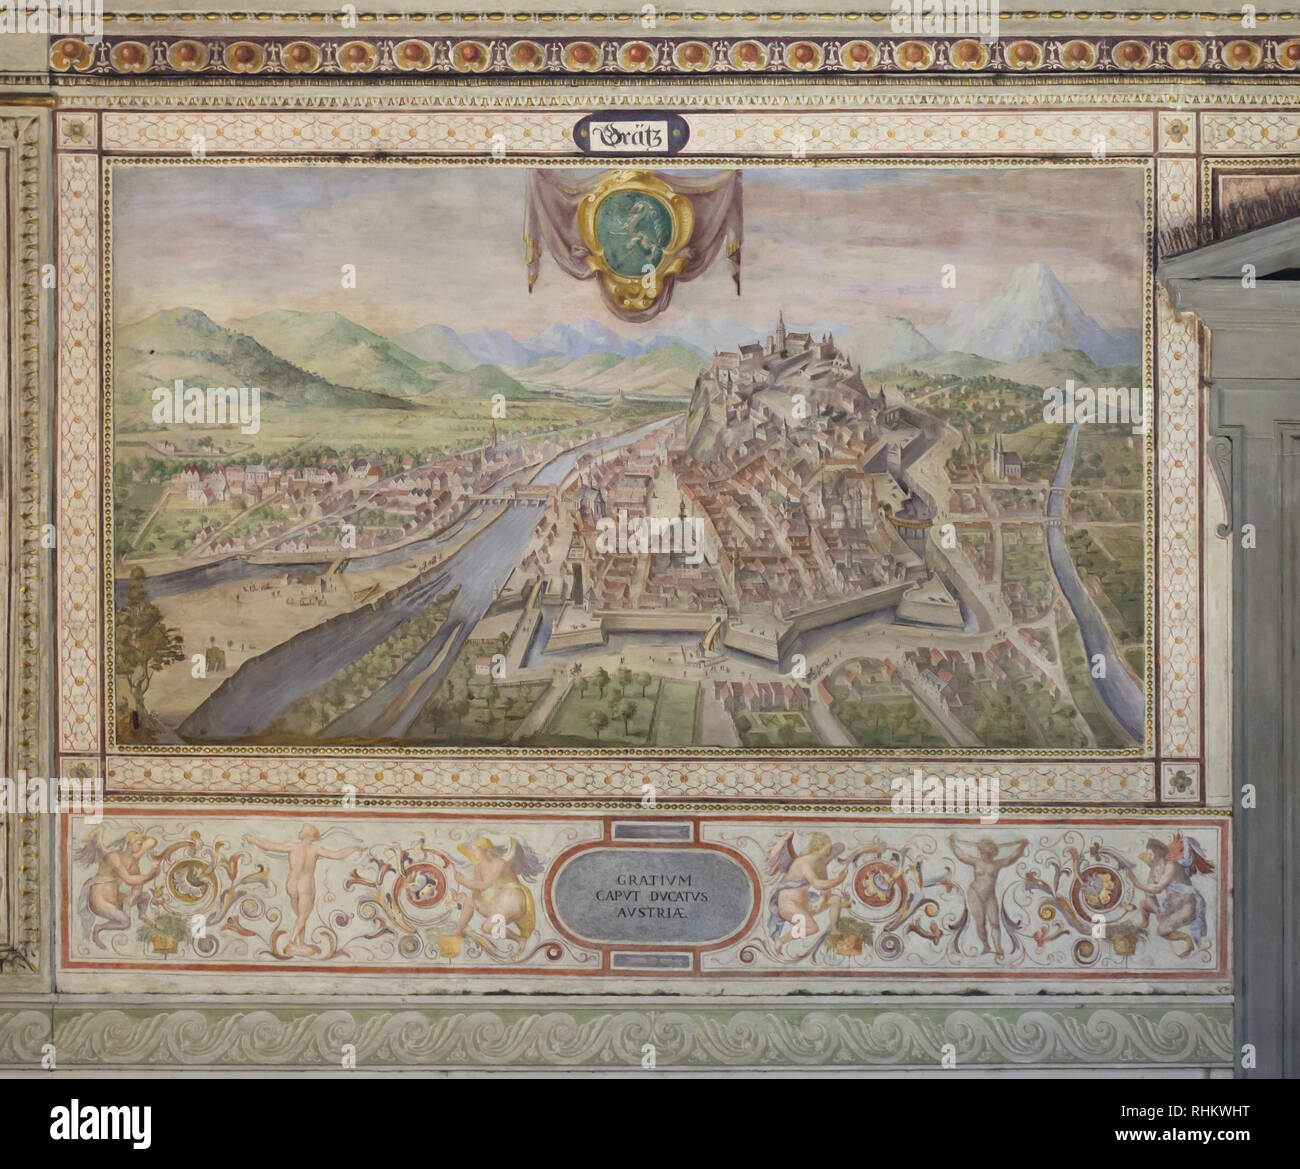 View of the Austrian city of Graz depicted in the mural painting by Bastiano Lombardi, Cesare Baglioni and Turino Piemontese in the First Courtyard (Primo cortile) in the Palazzo Vecchio in Florence, Tuscany, Italy. Stock Photo